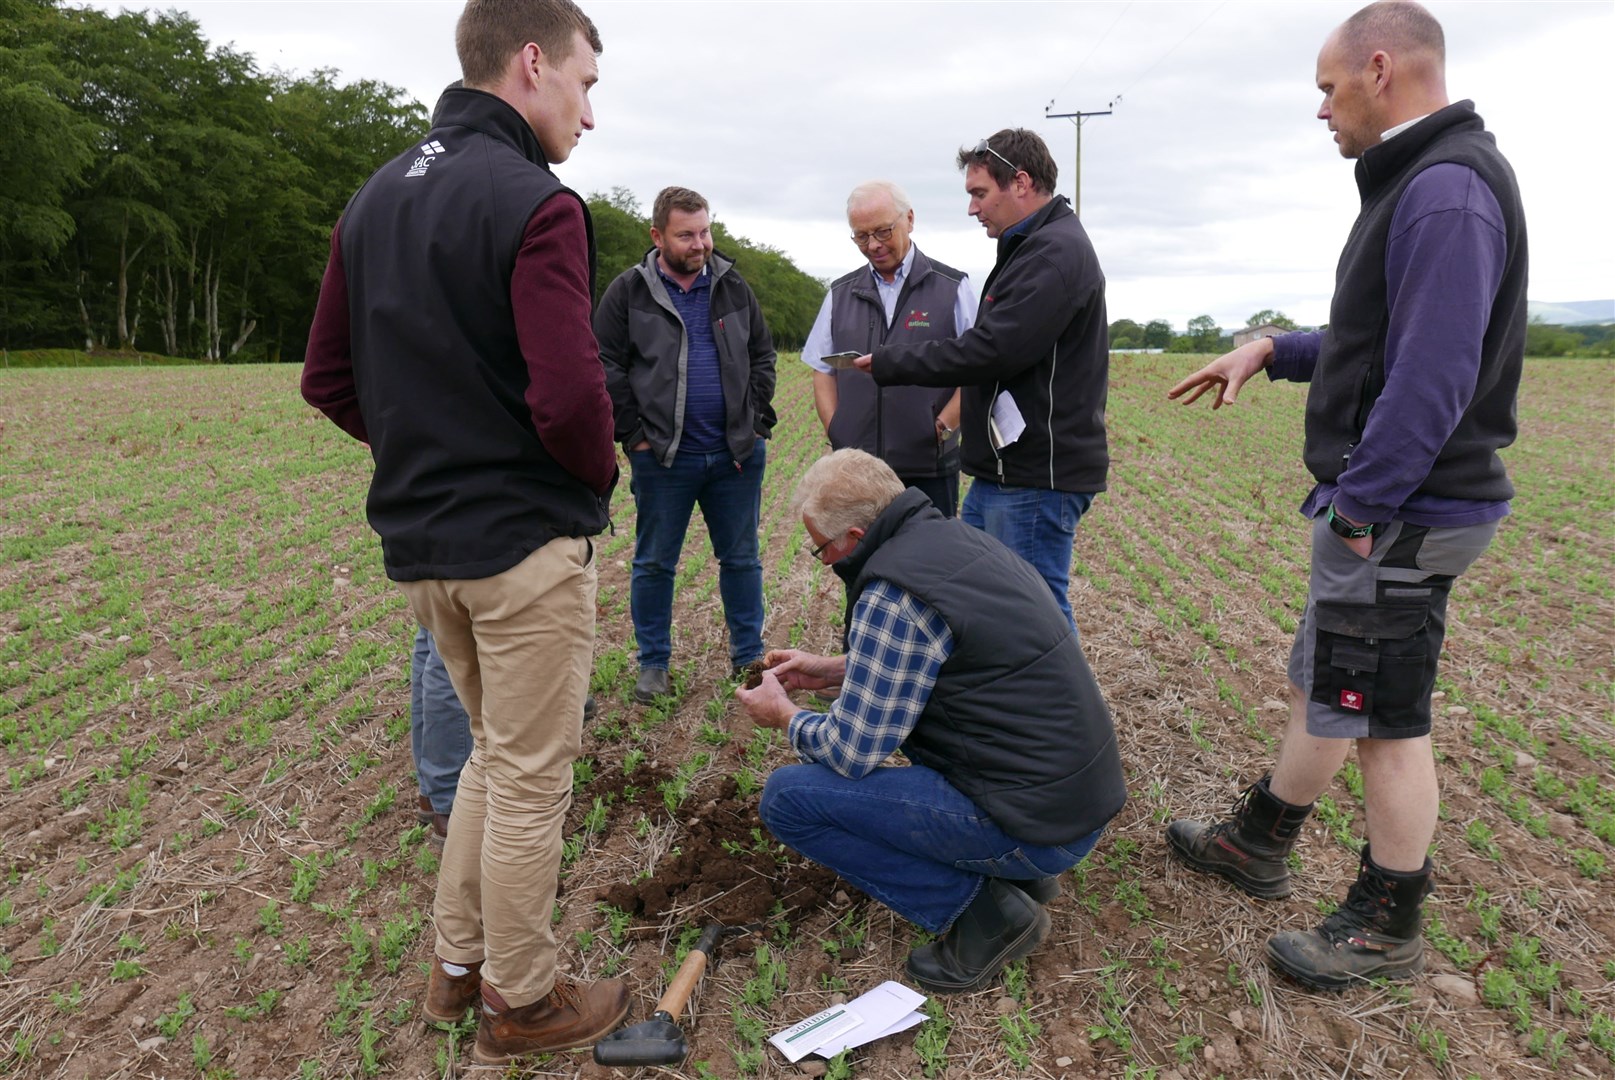 The Soil Regenerative Agriculture Group brought together five farmers to explore a range of management techniques, treatments, crops, and rotations, to help build soil resilience